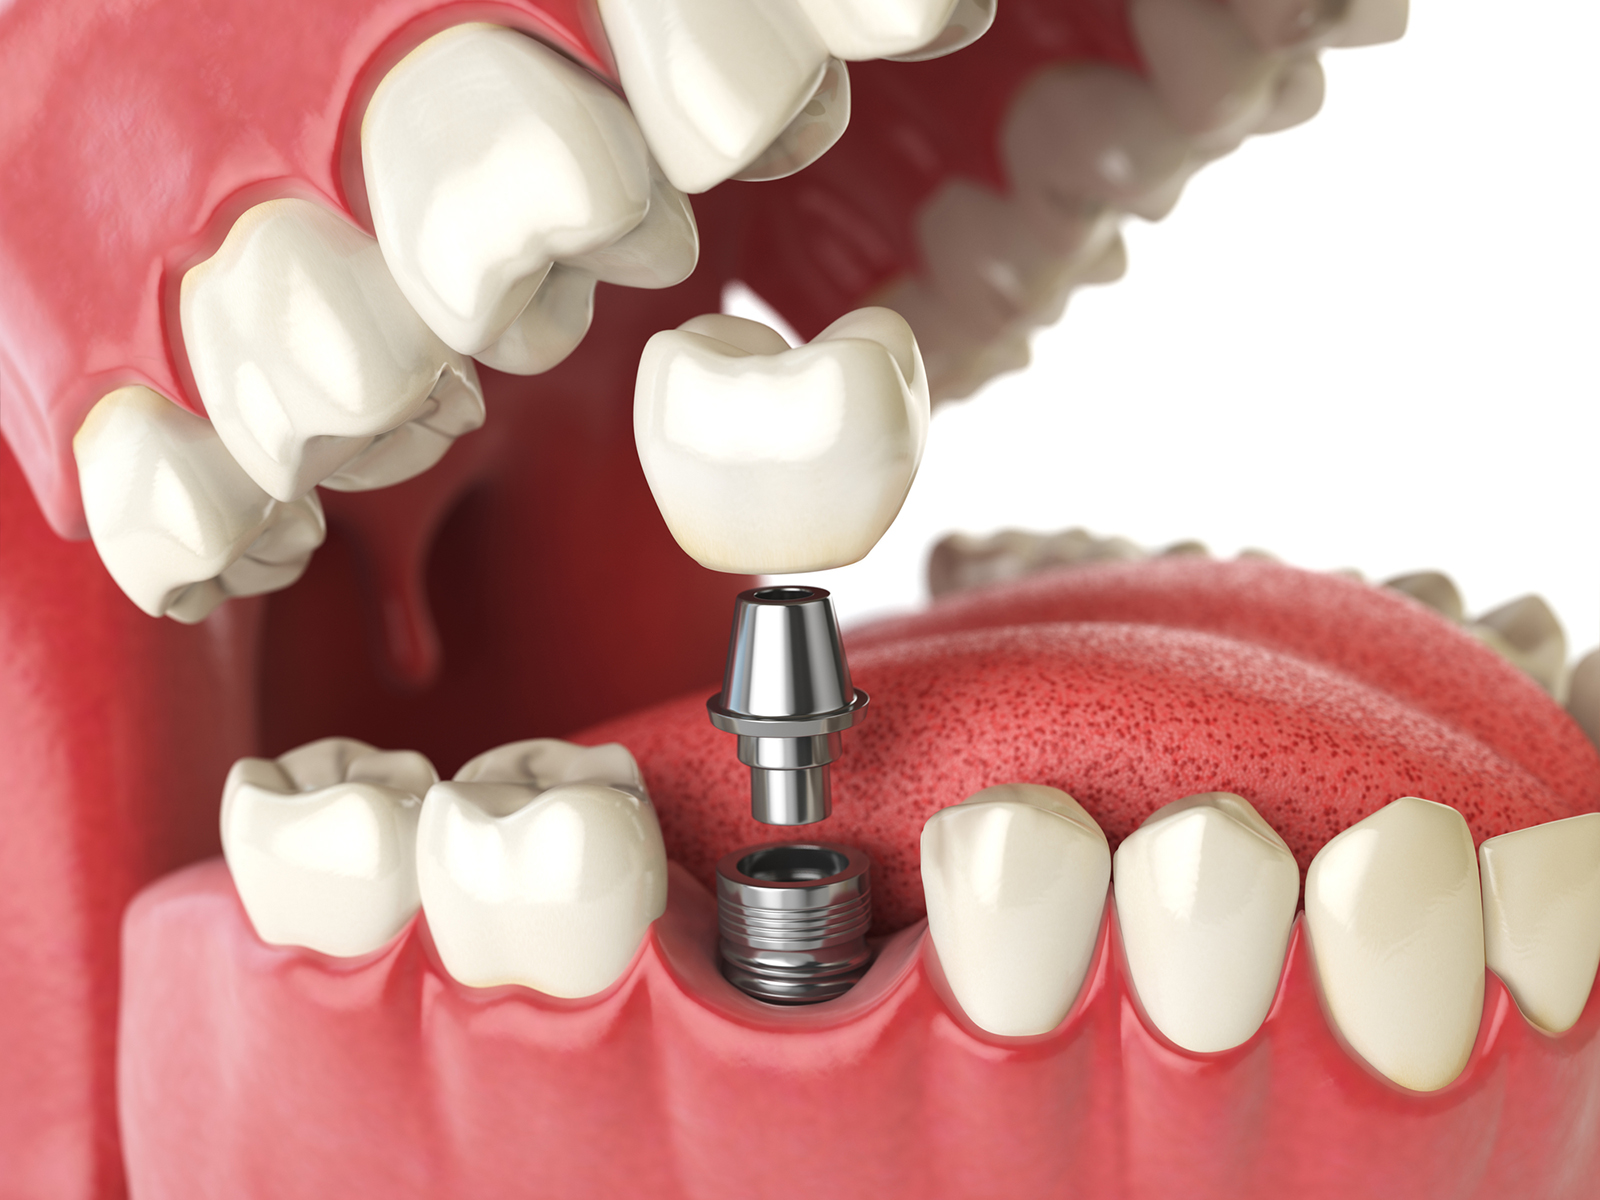 Is there a cheaper alternative to dental implants?